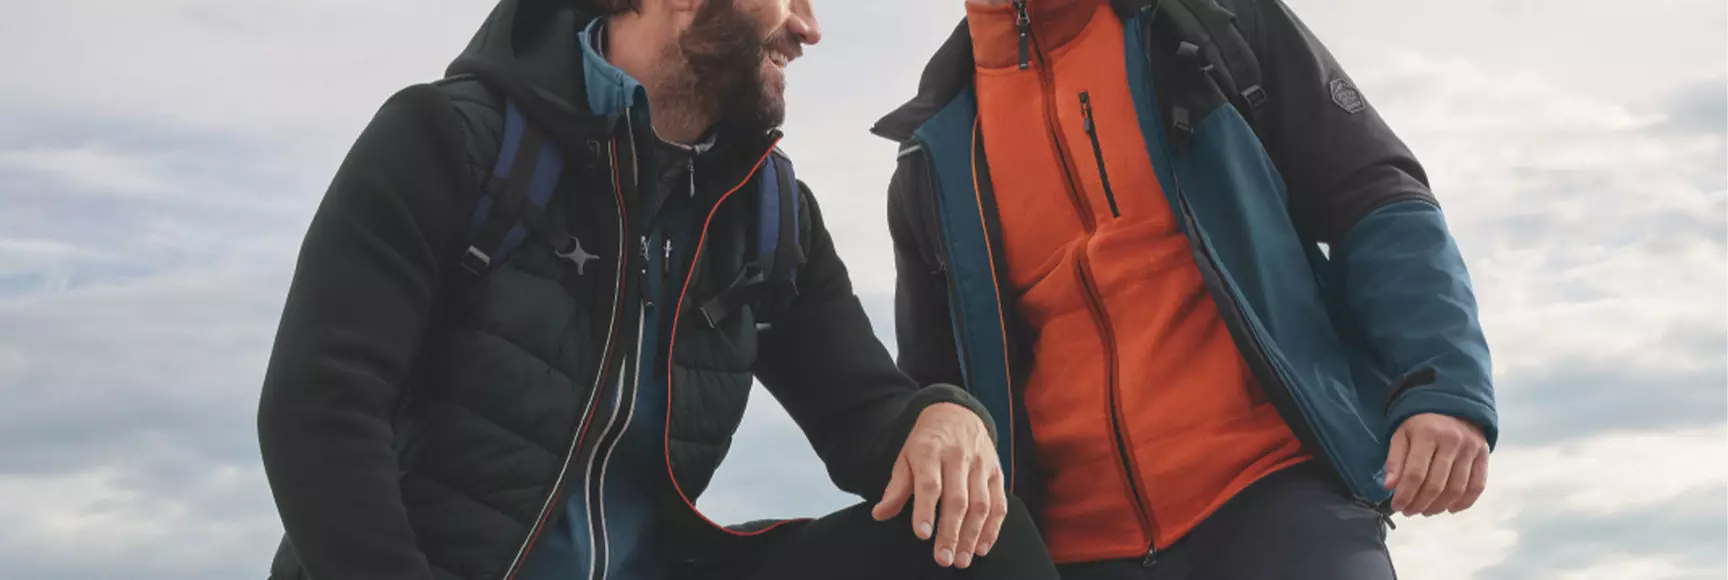 C&A Adopts THERMOLITE EcoMade insulation for new men’s outerwear collection offering sustainable lightweight warmth.